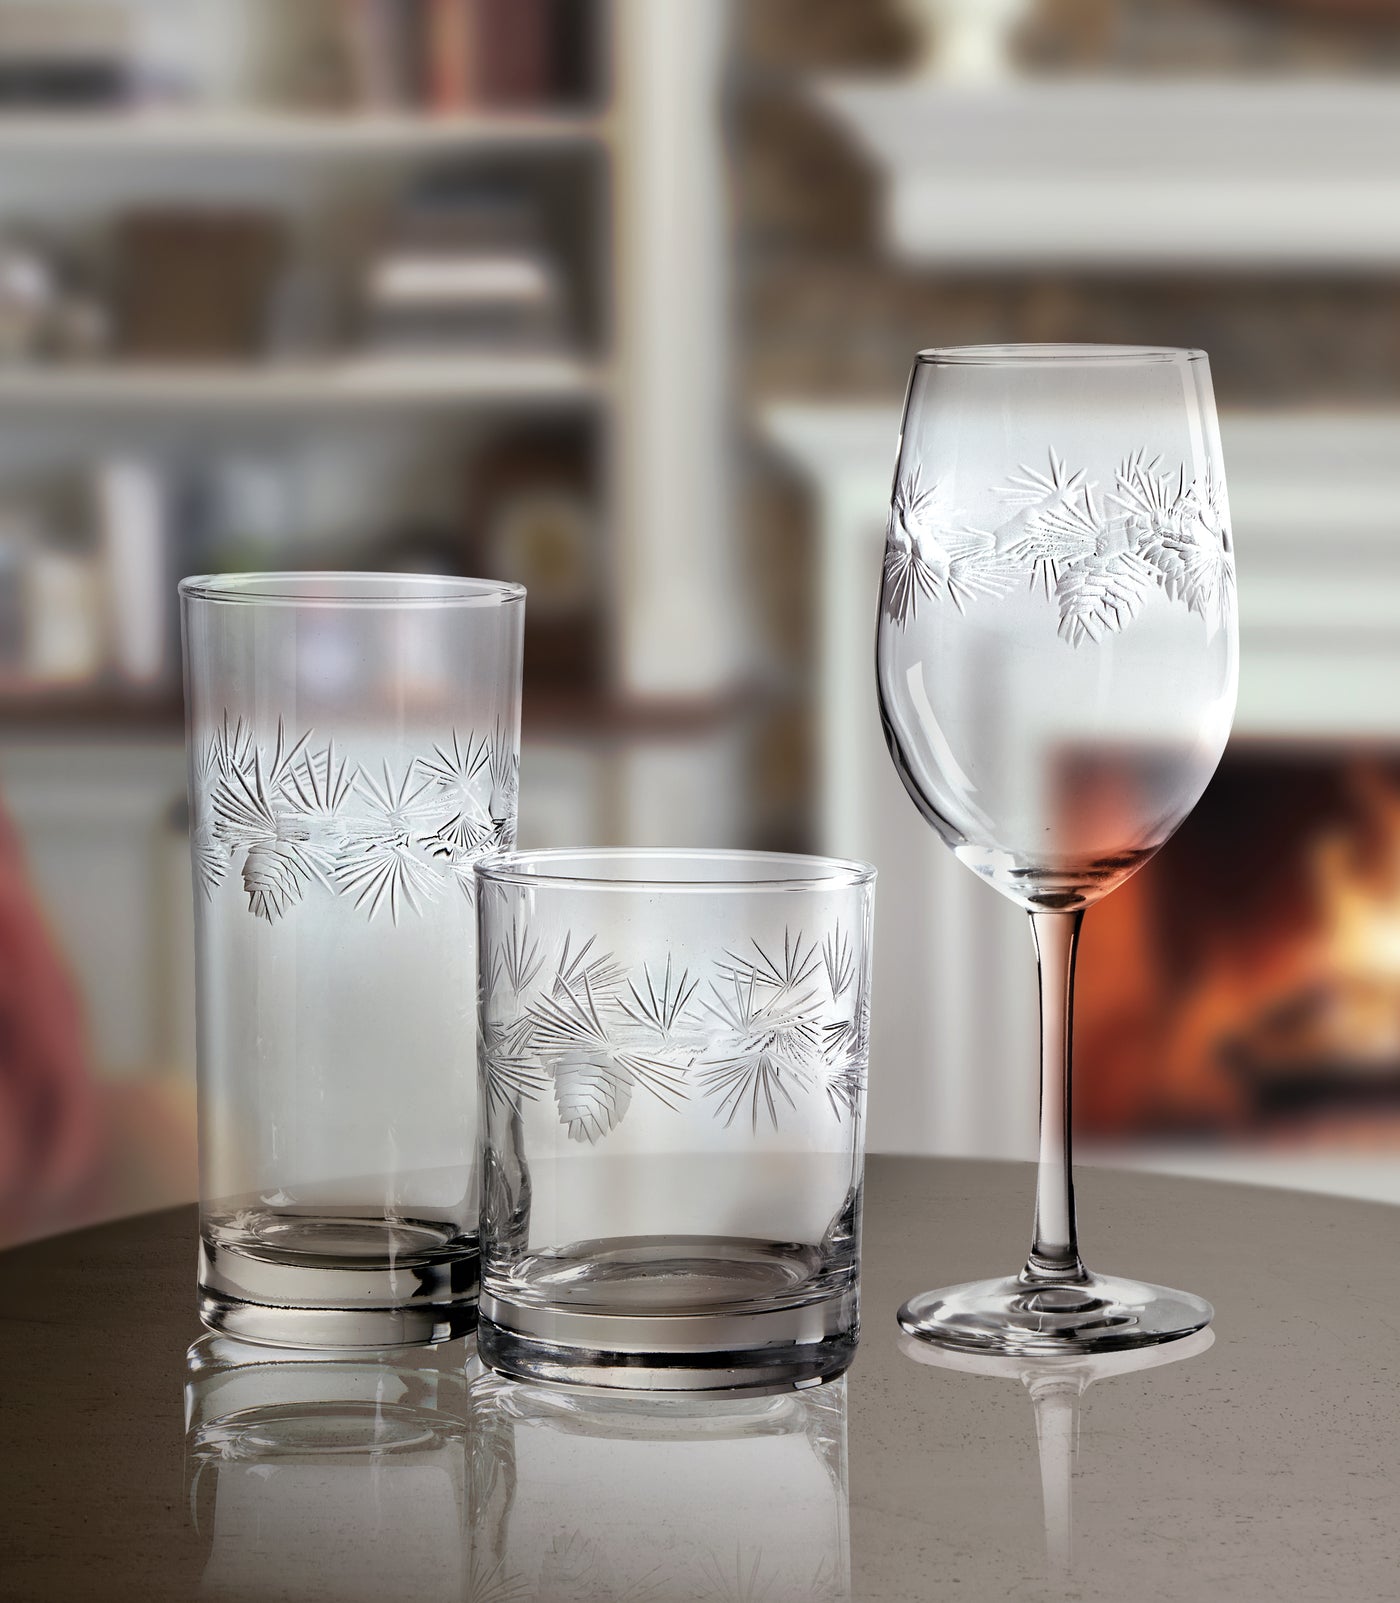 Icy Pine Glasses (Sets of 4)